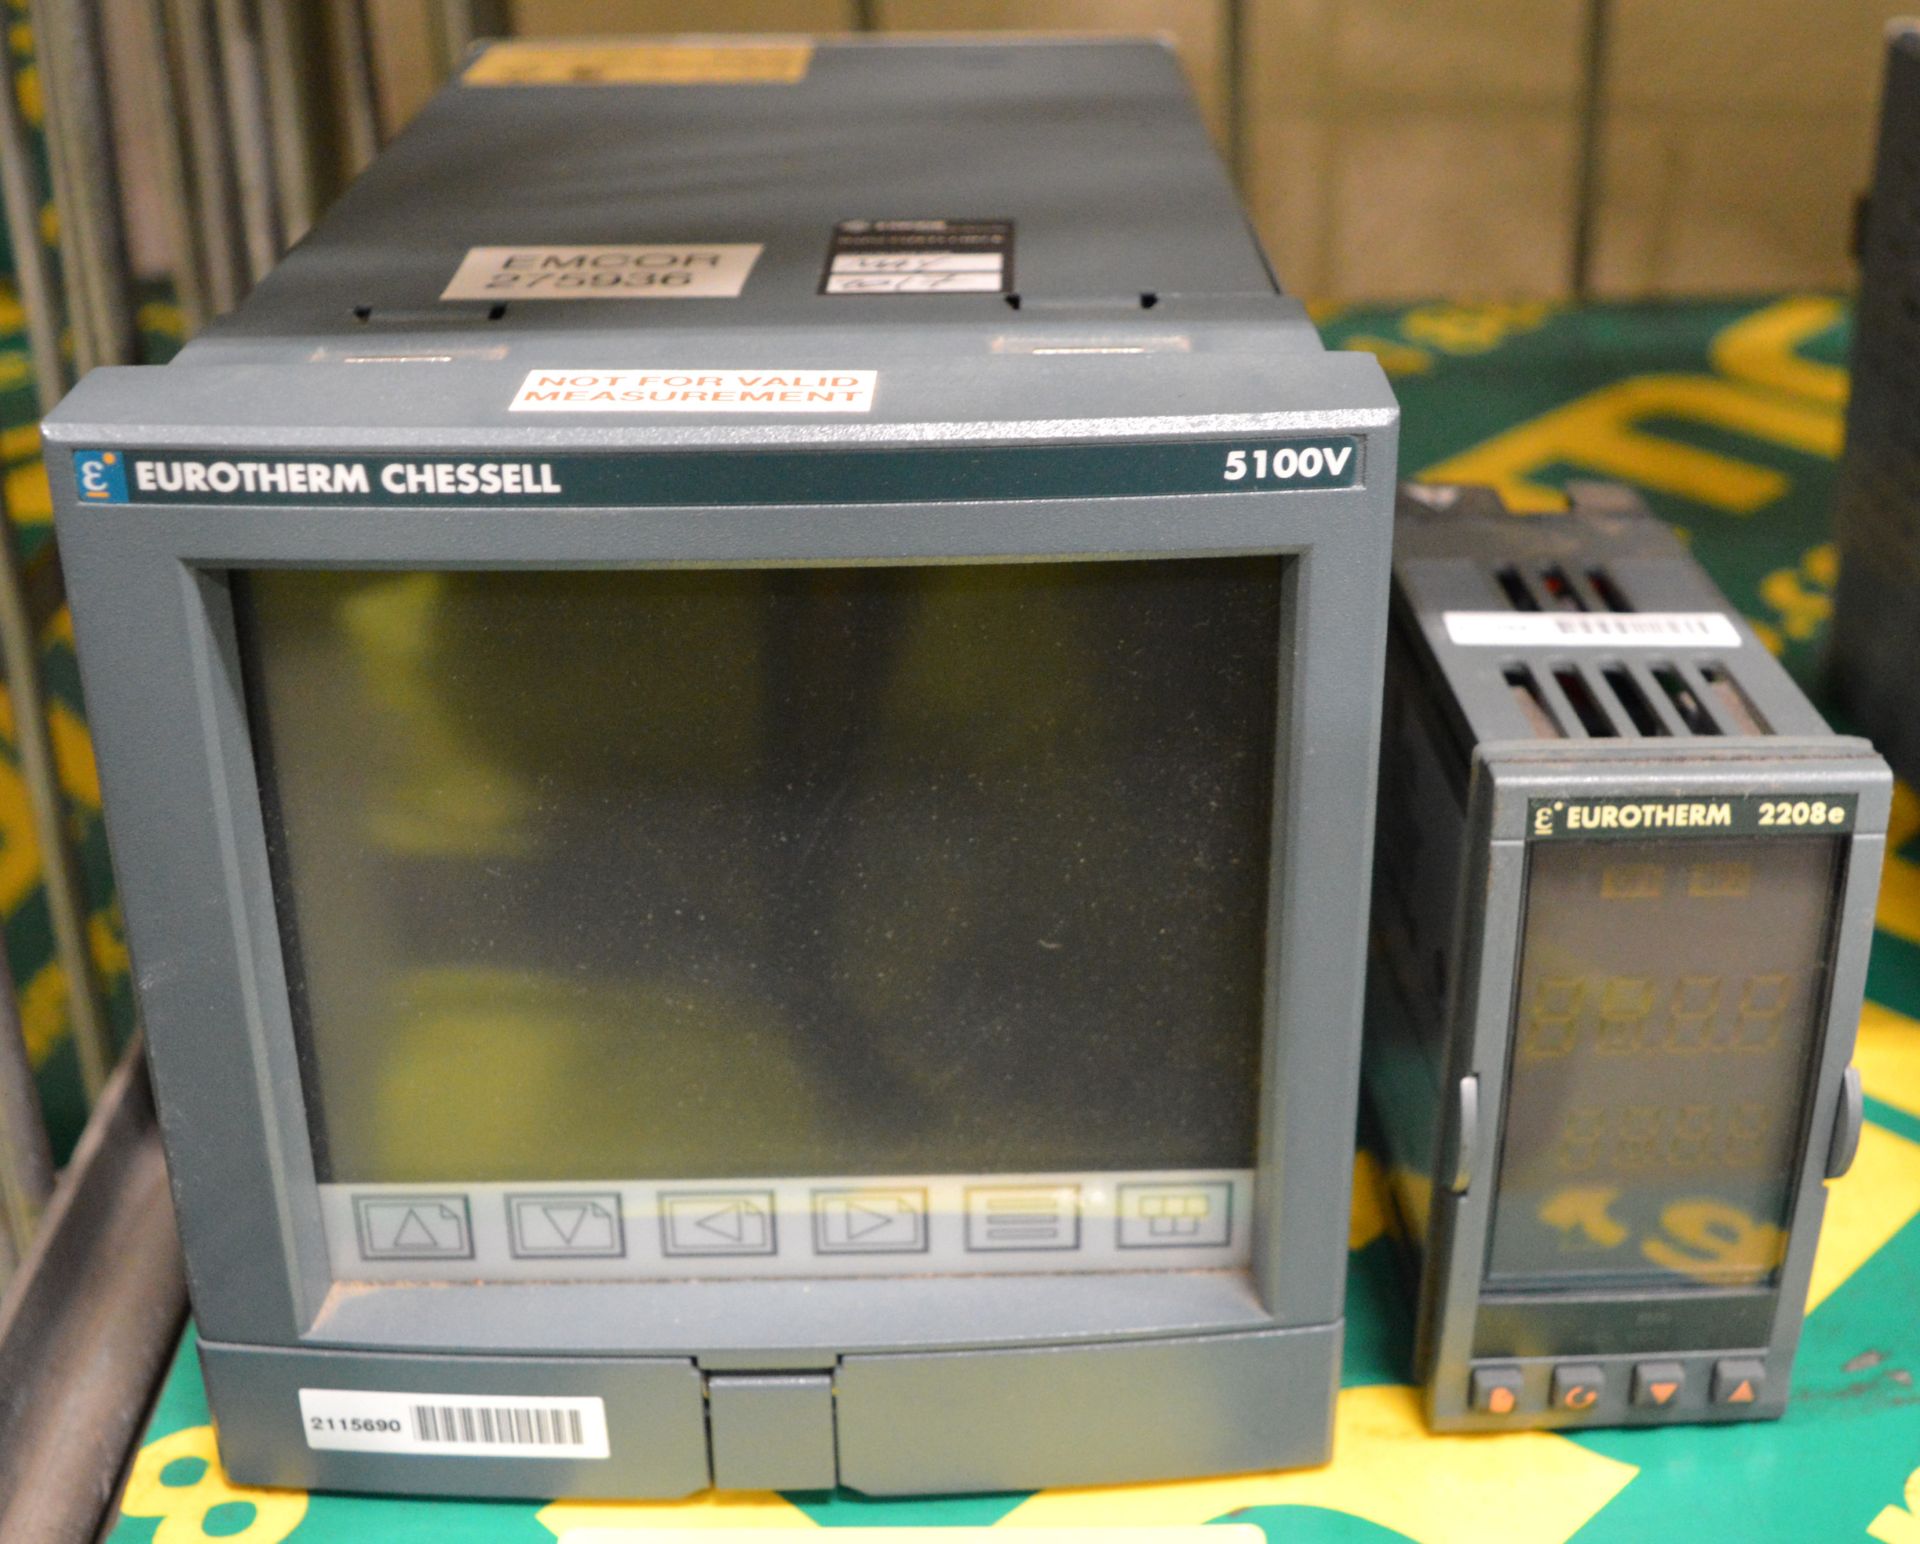 Eurotherm Chessell 5100V - Display Unit. Eurotherm 2208e - Digital Display Unit.